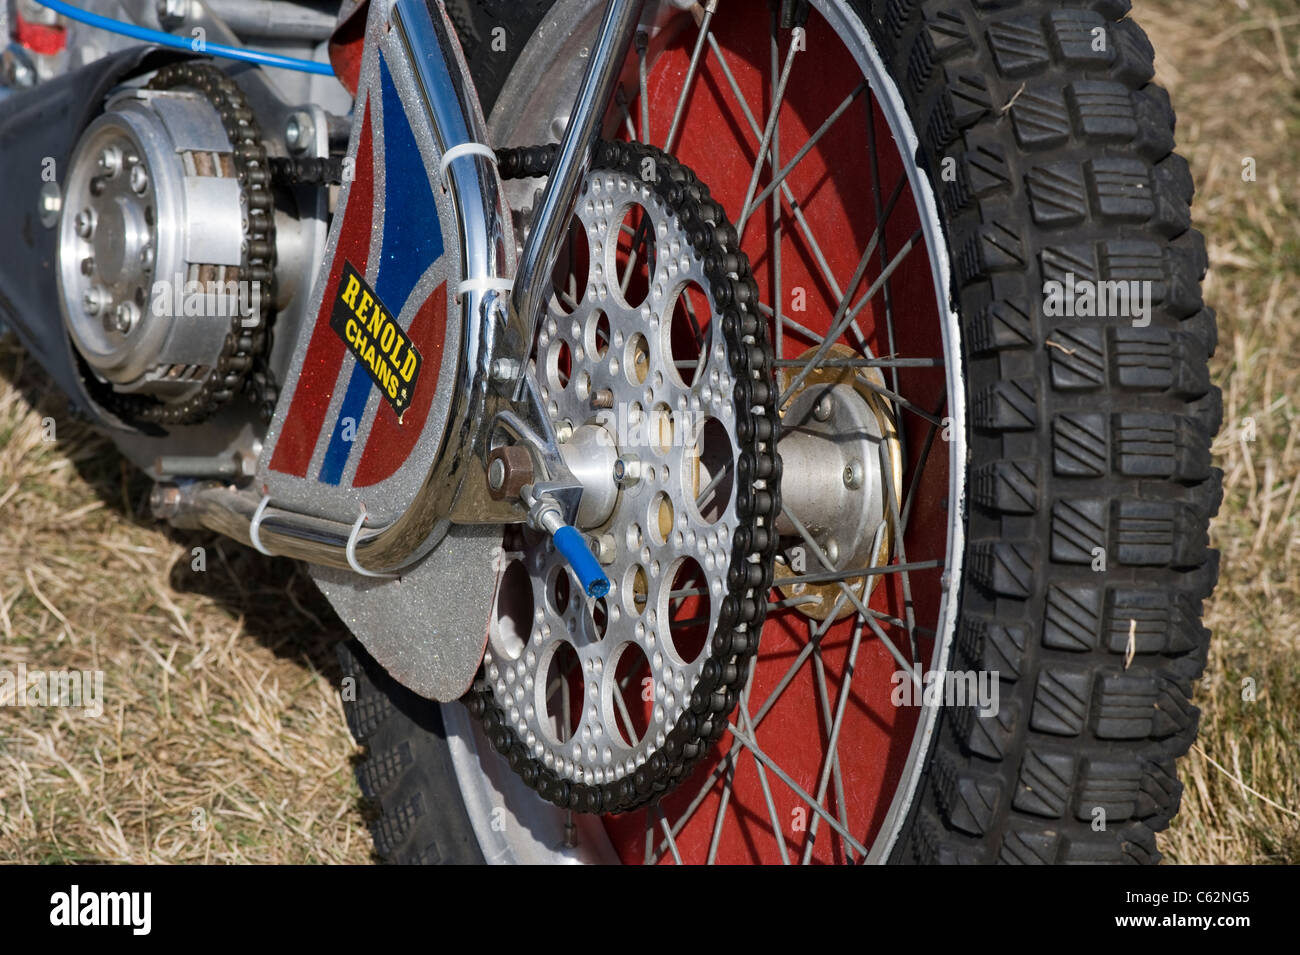 chain sprocket and clutch Stock Photo